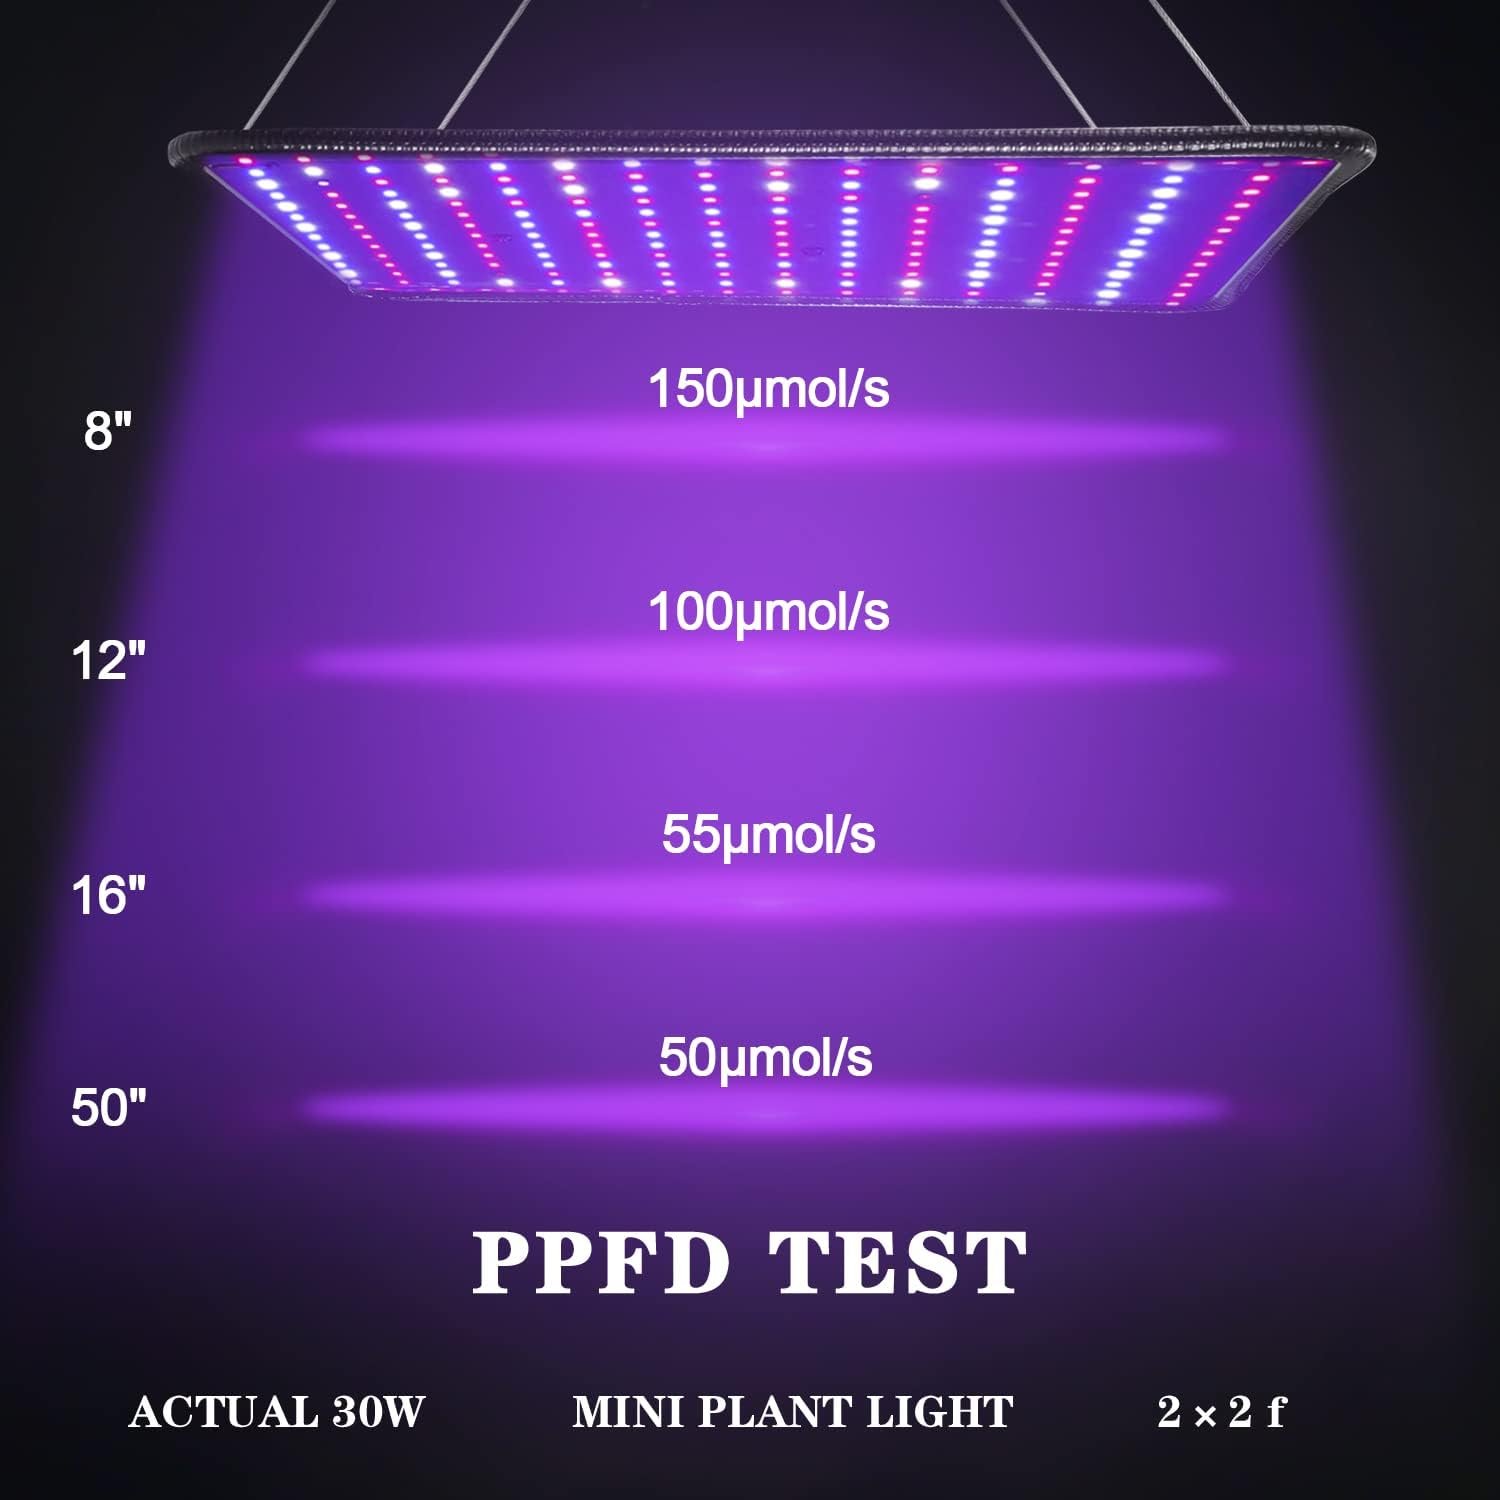 Grow Light for Indoor Plants - SERWING 200W LED Grow Light Full Spectrum, Plant Growing Lamp for Indoor Cultivation, Greenhouse, Grow Tent, Hydroponics (Sunlight)